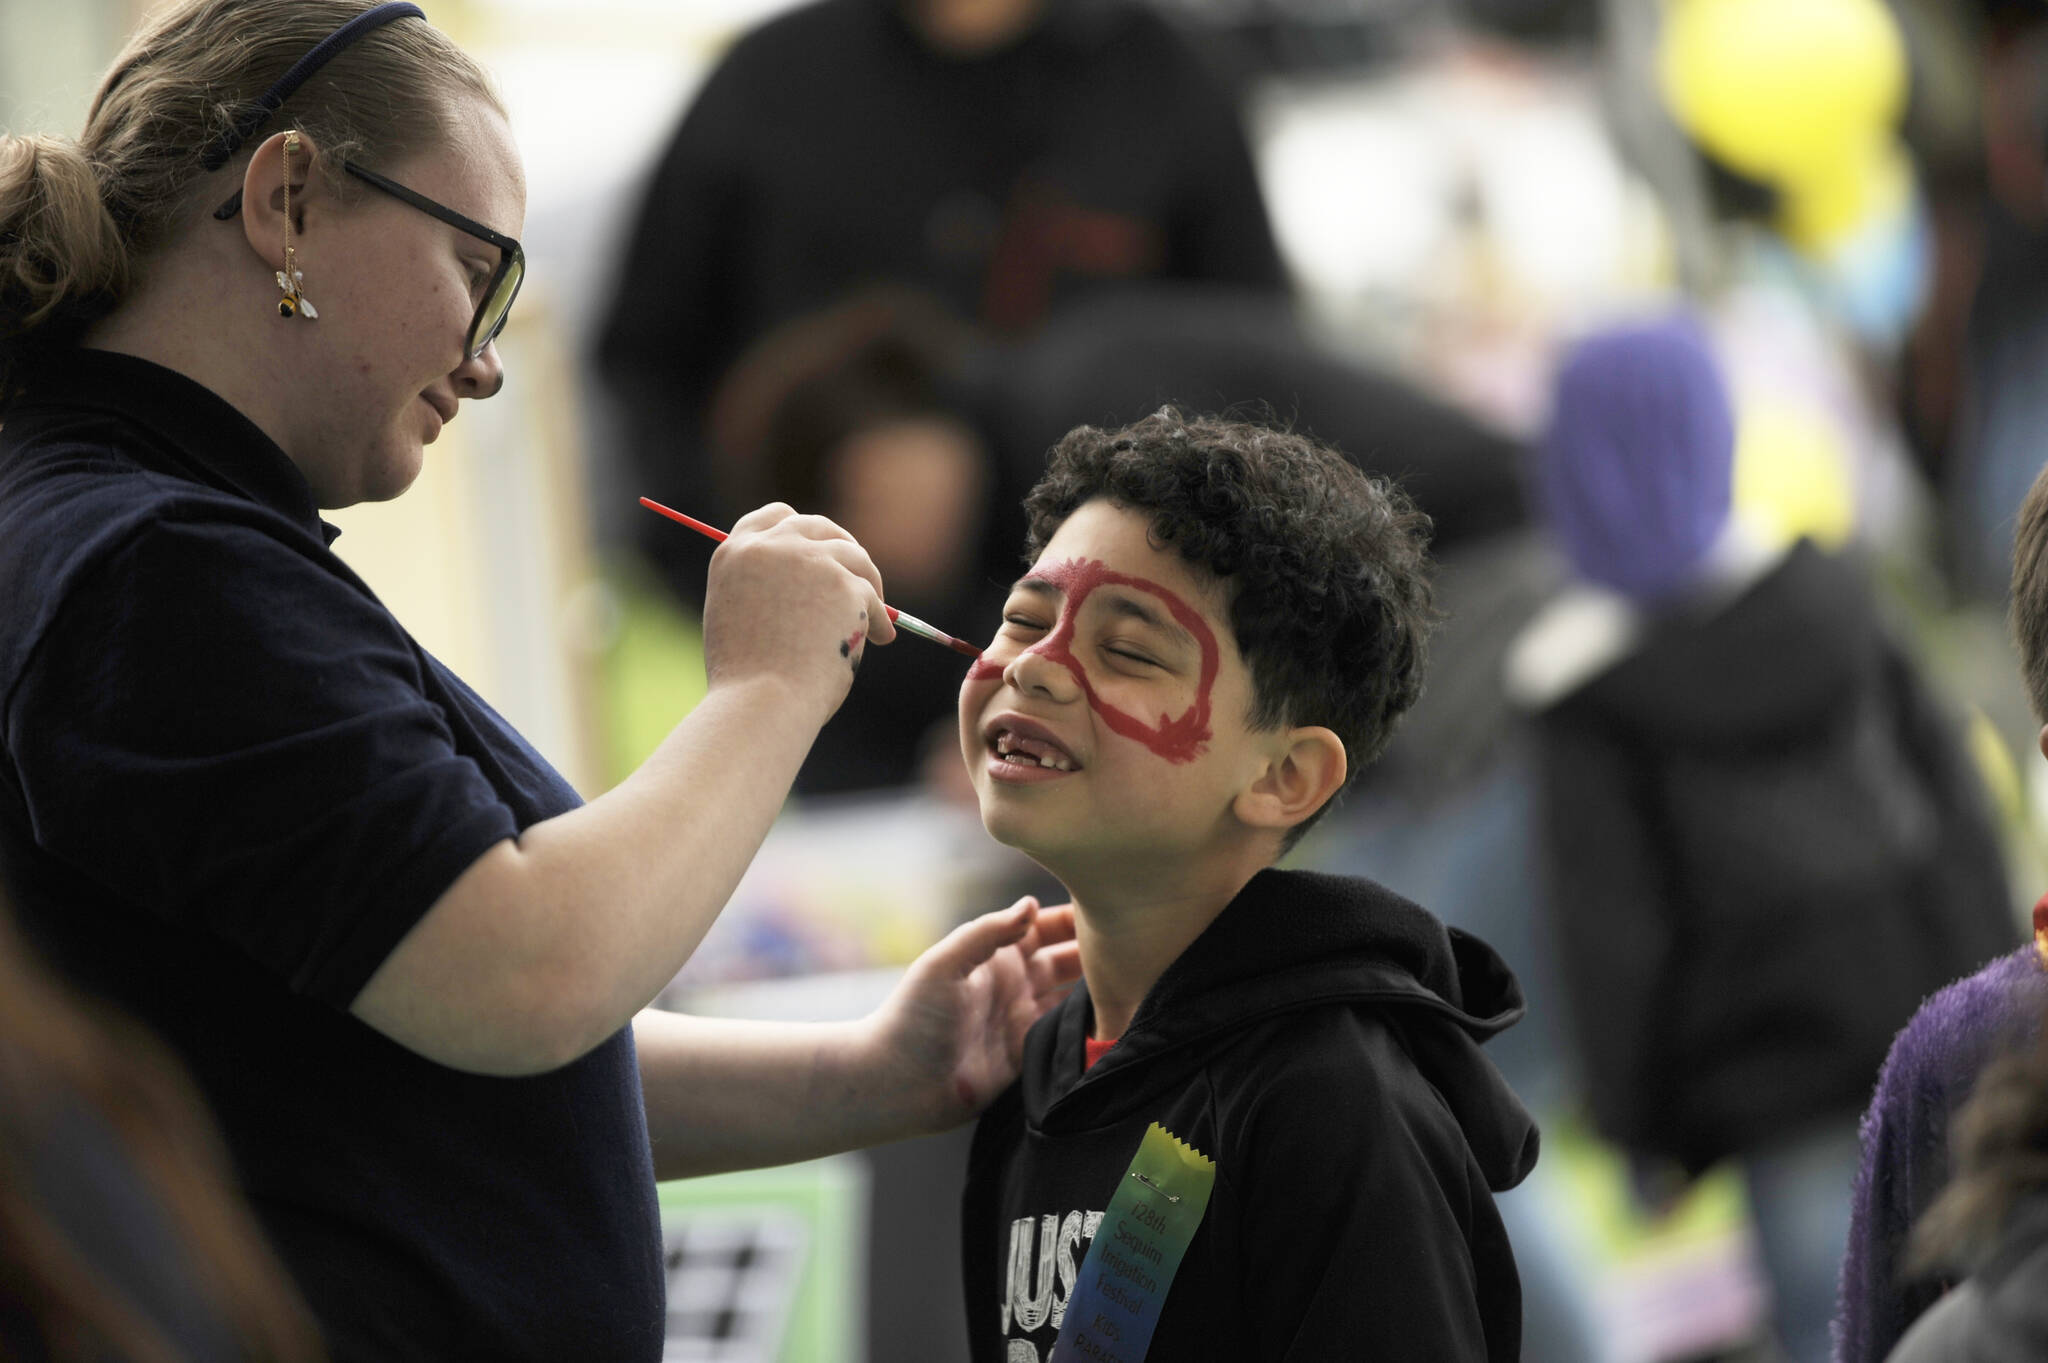 Sequim Gazette photo by Michael Dashiell / Six-year-old Ezekiel Hicks of Sequim gets his face painted by high school junior Zinnia Barnes at the Sequim High FFA’s booth at the Family Fun Day event on May 6.